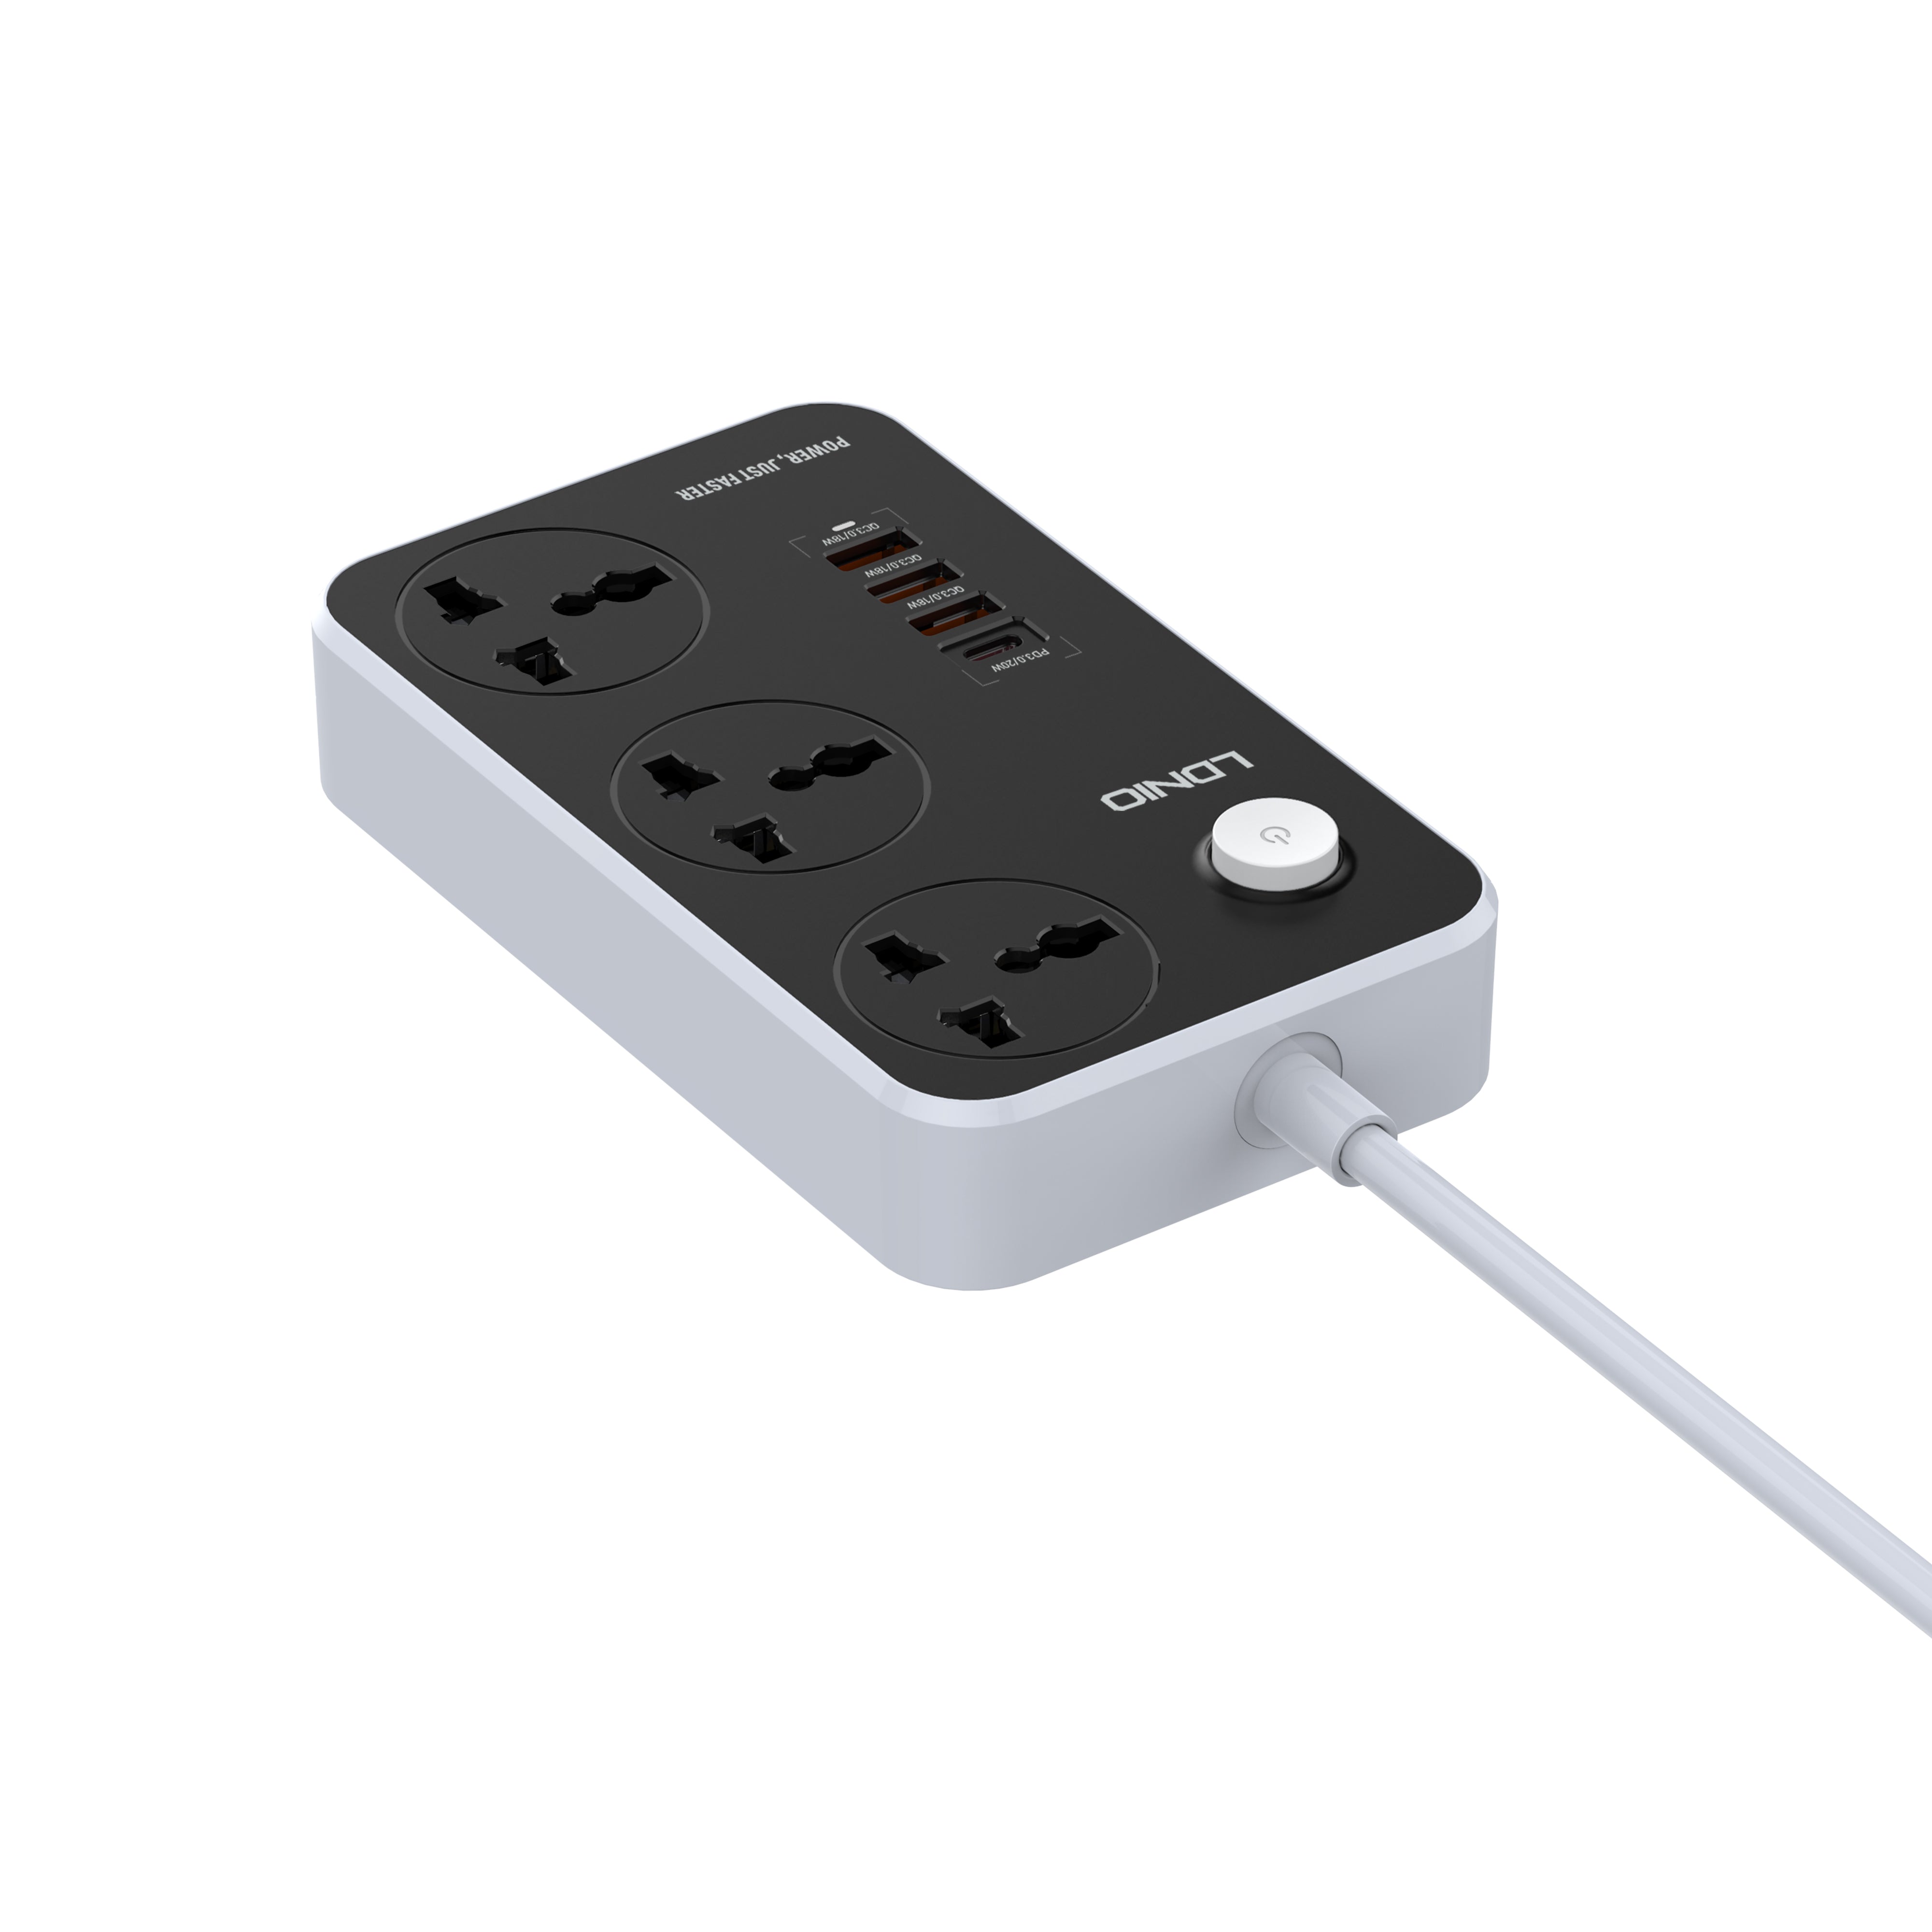 LDNIO Super Fast Charging Power Strip With 3 USB Ports and Type-C Port | Shopna Online Store .